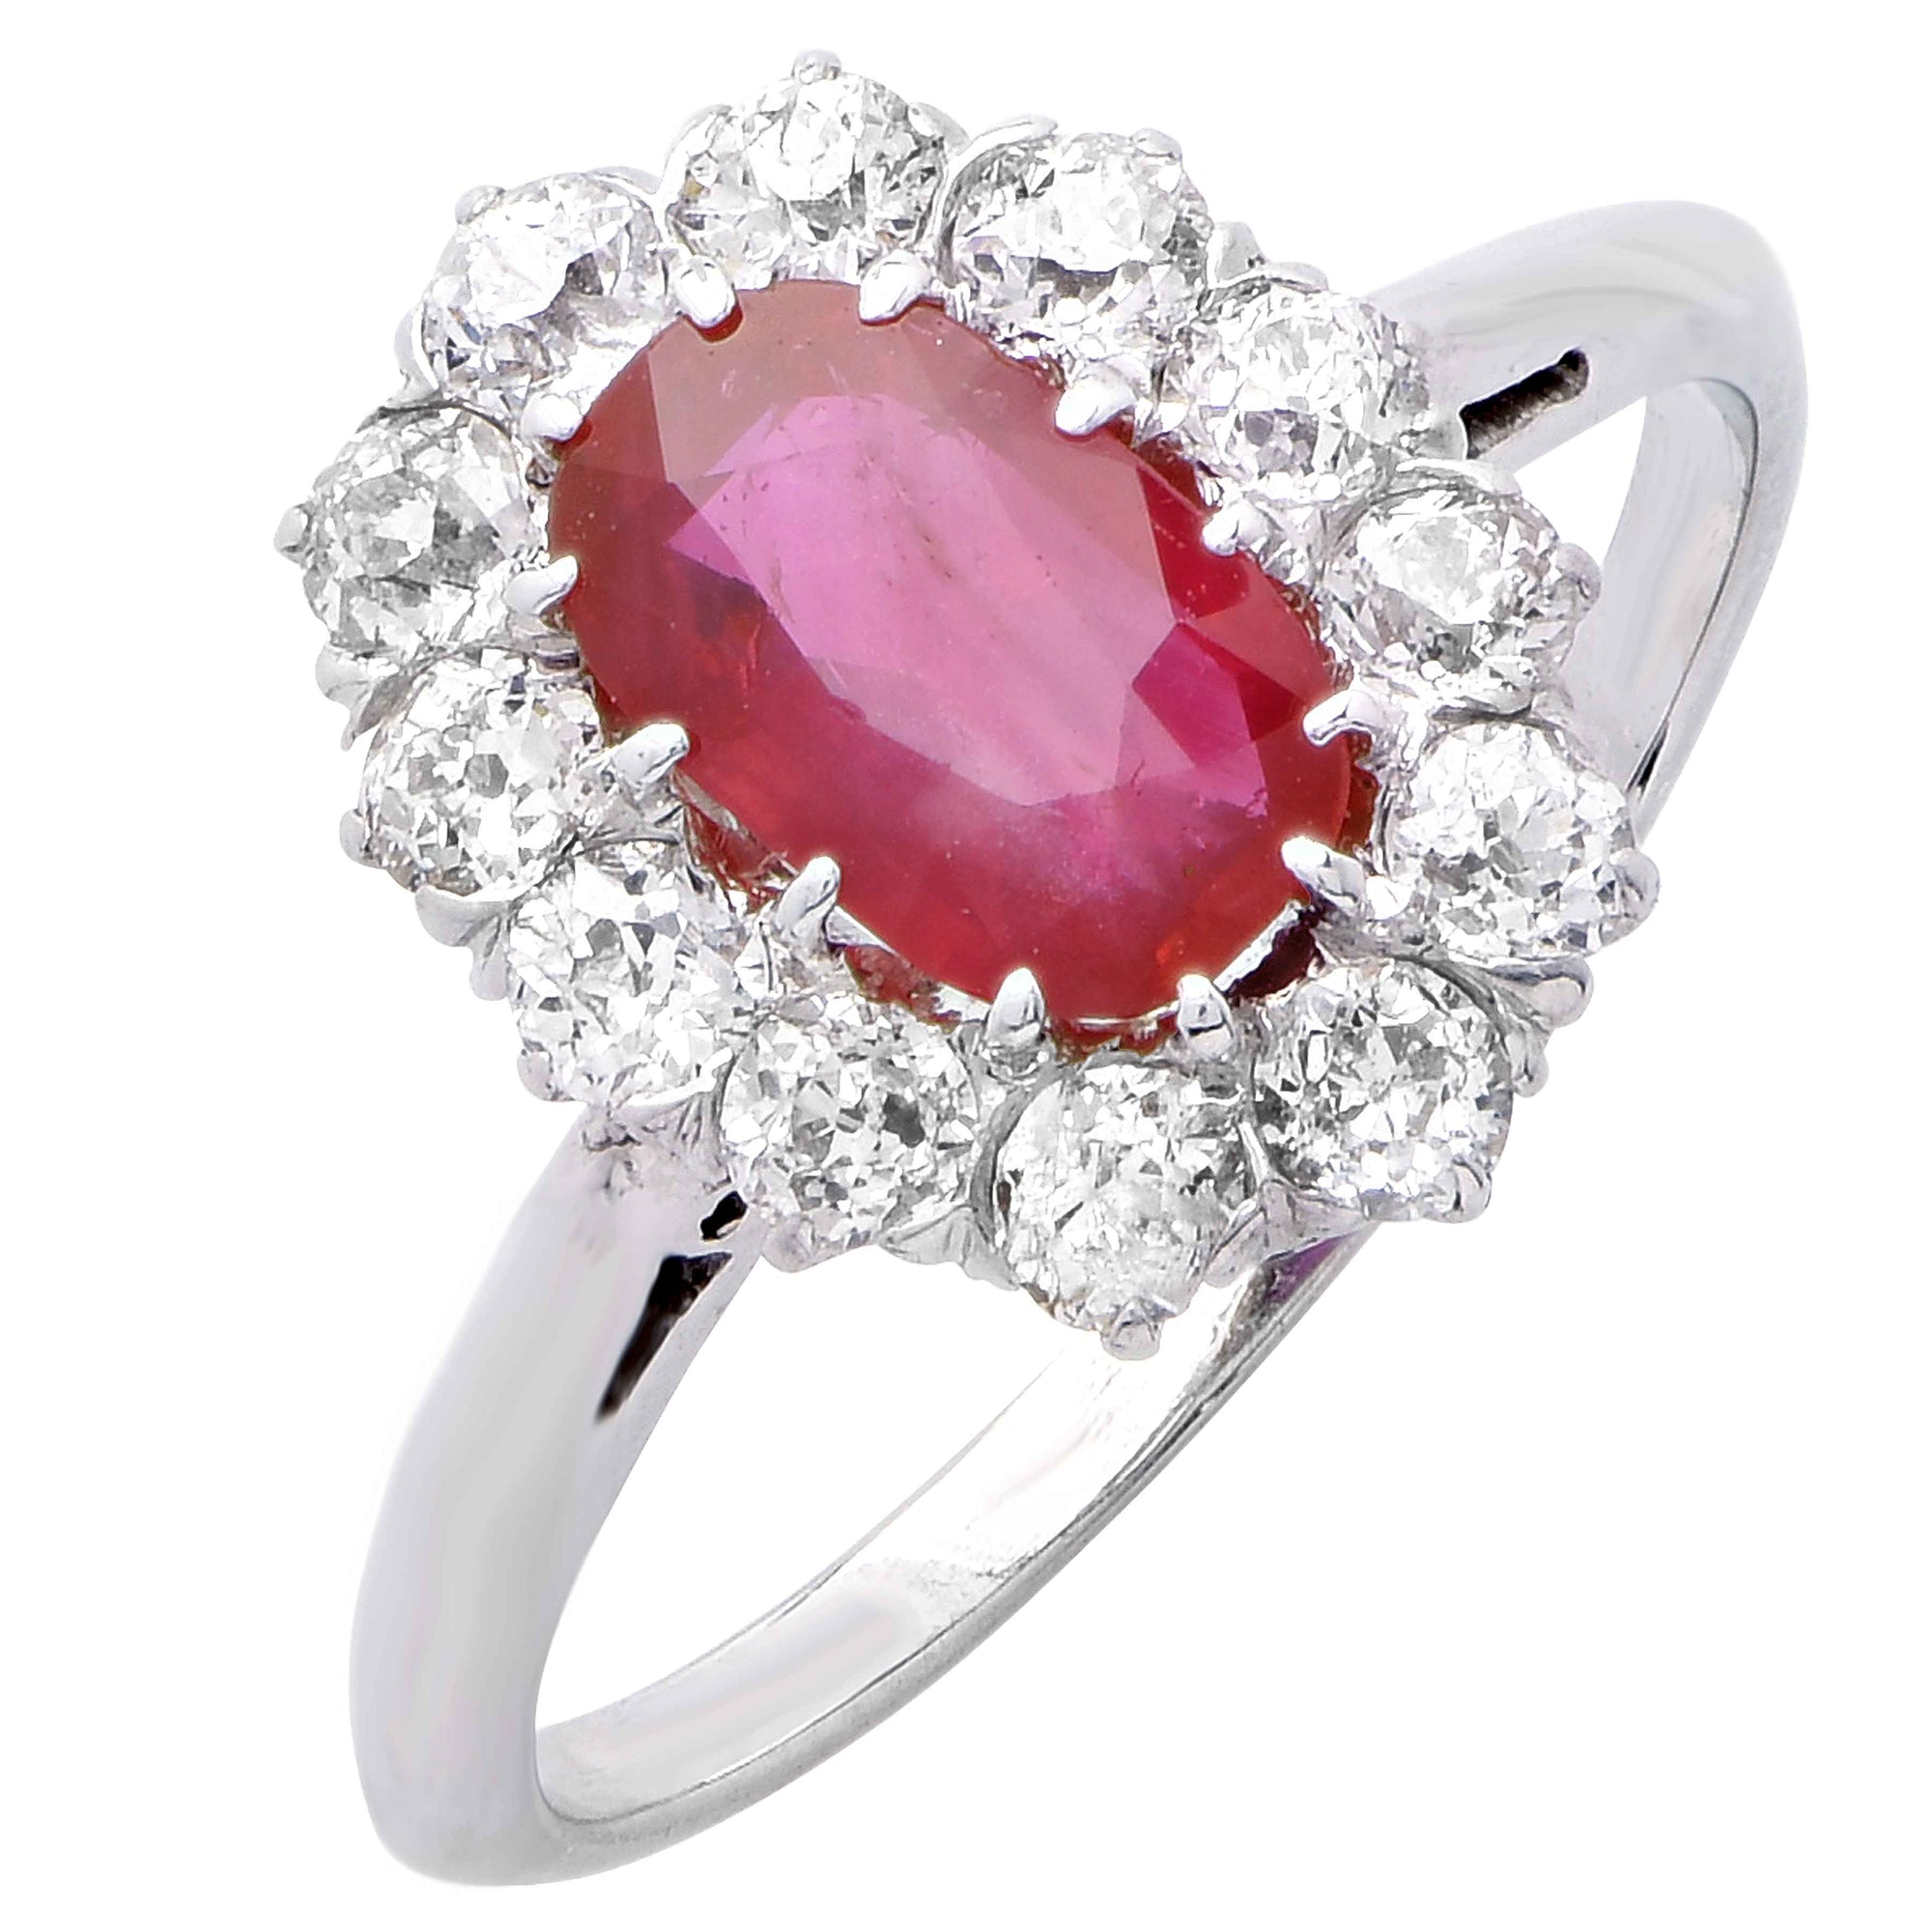 6.01 mm Natural Ruby Engagement Ring in White Gold | Shane Co.